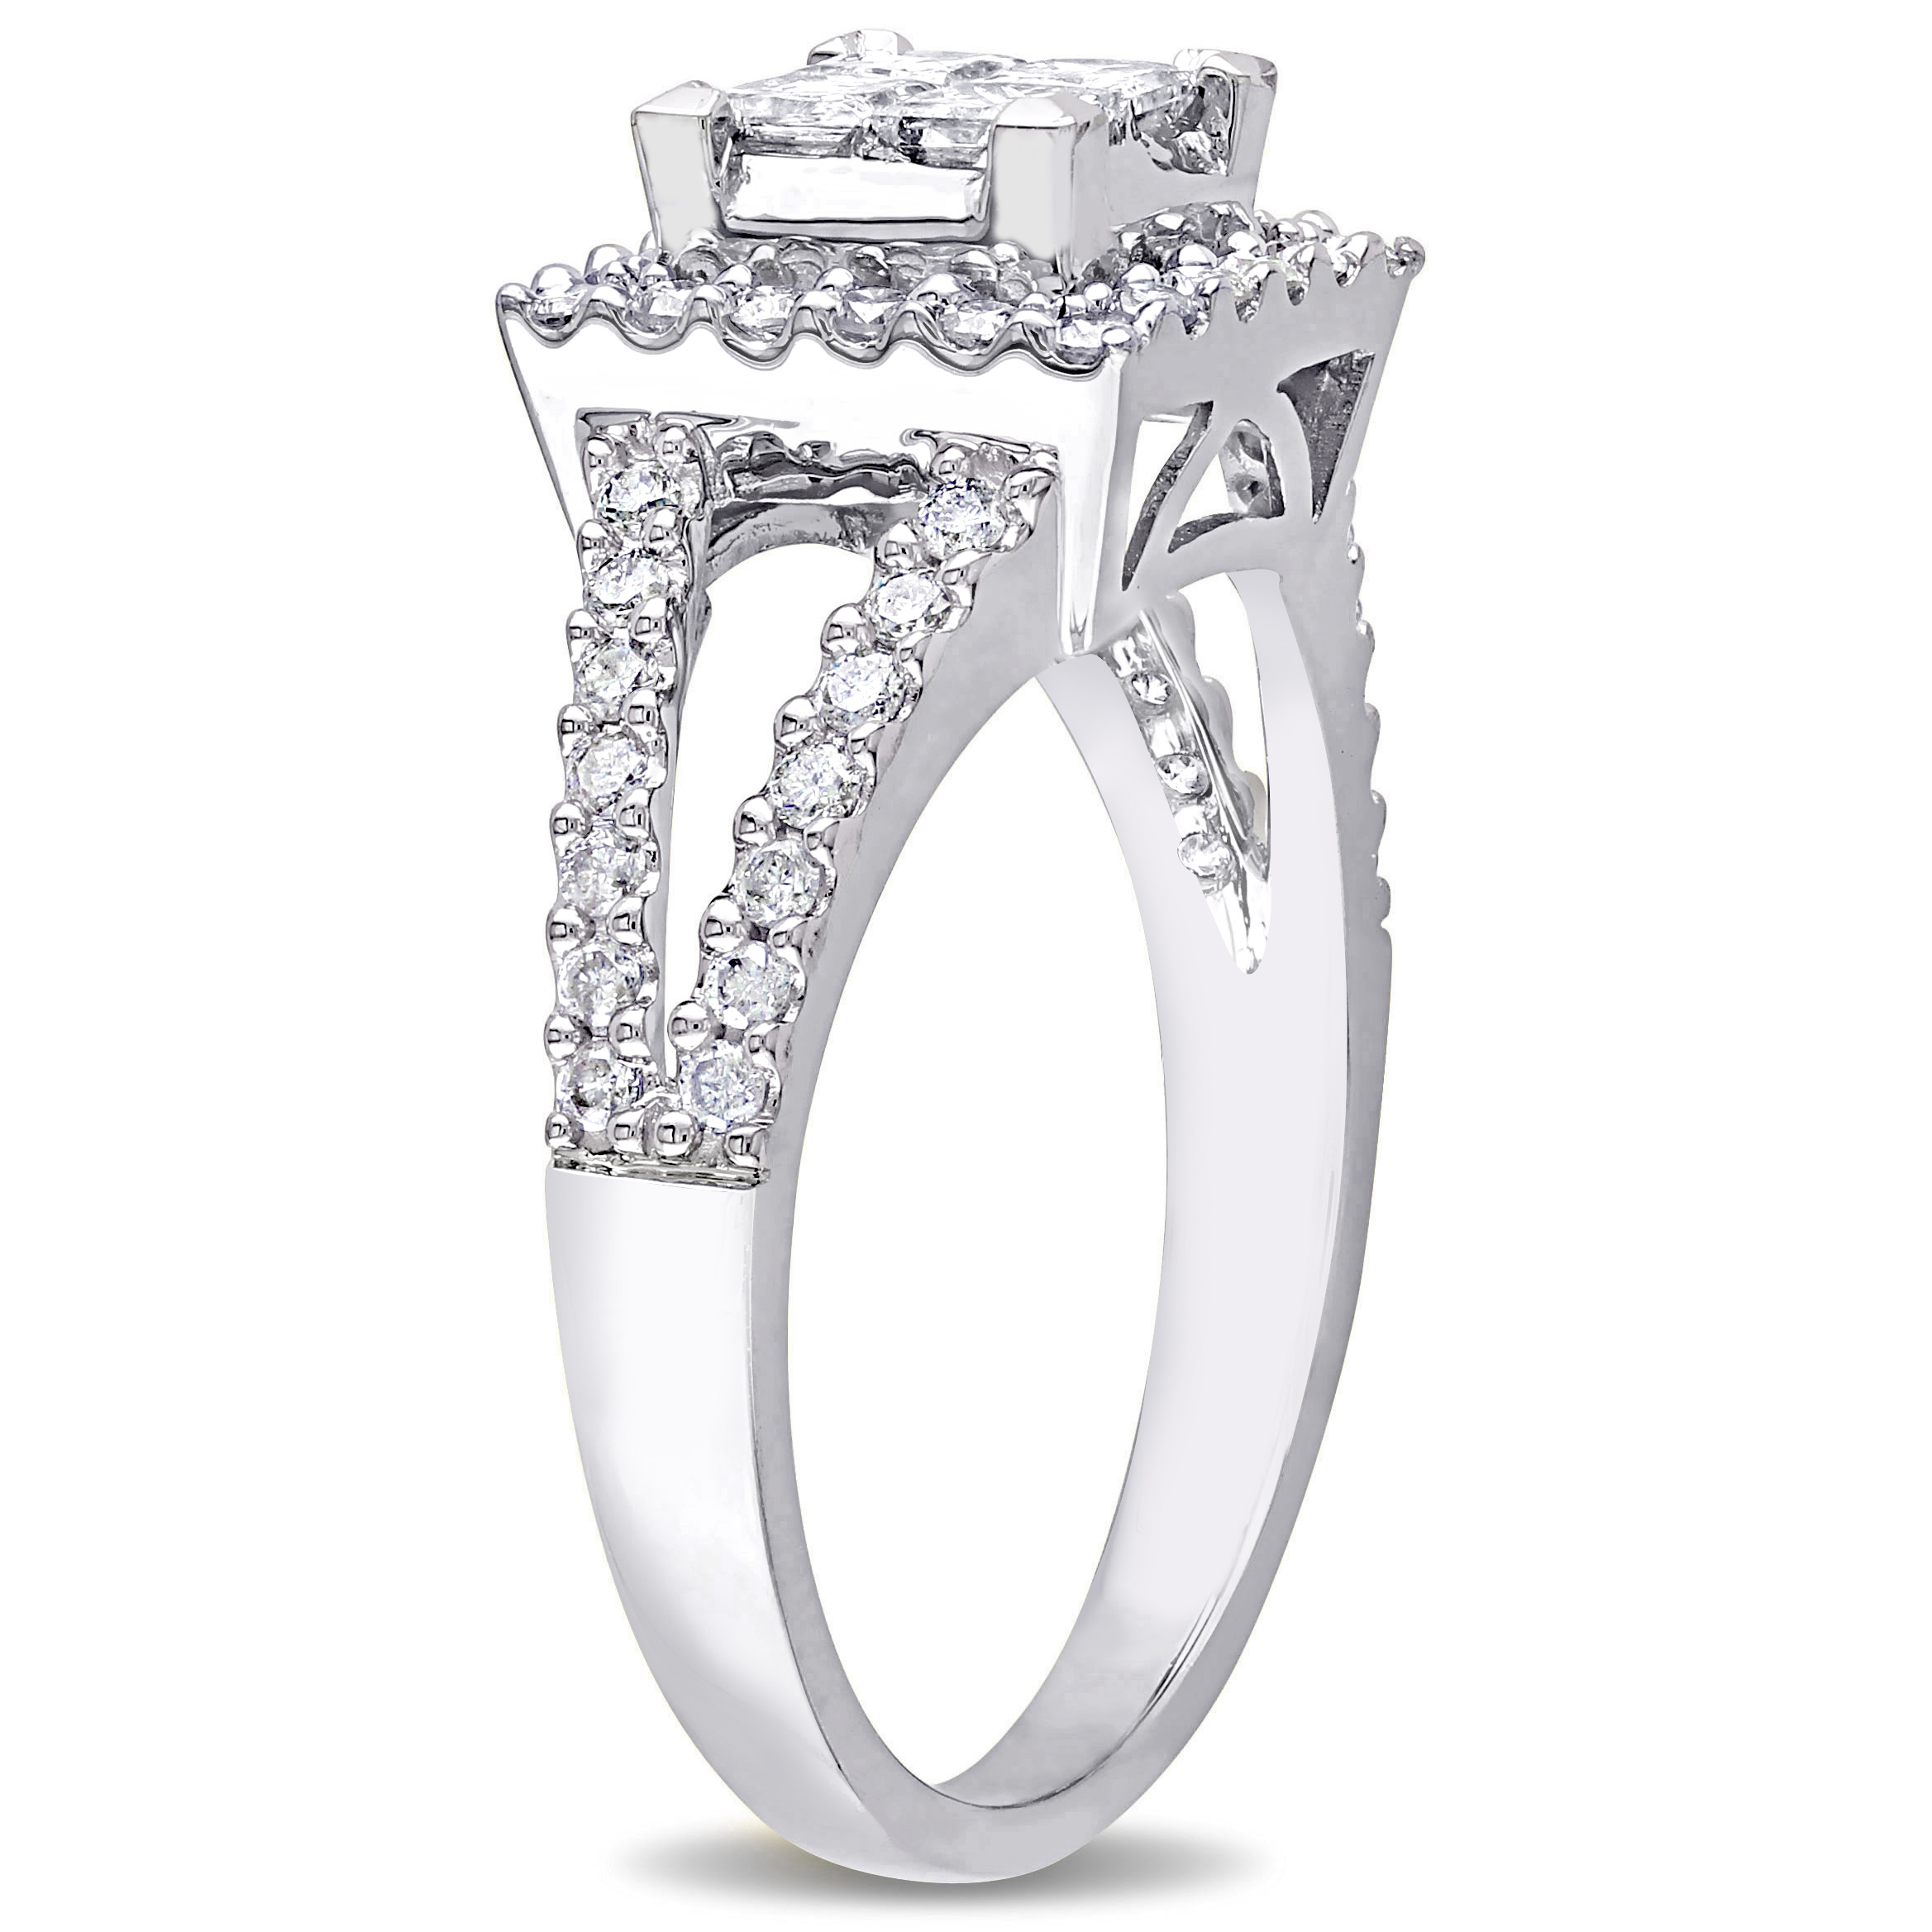 Sehgal jewels Men's Diamond Ring, Weight: 4.544 at Rs 51650 in New Delhi